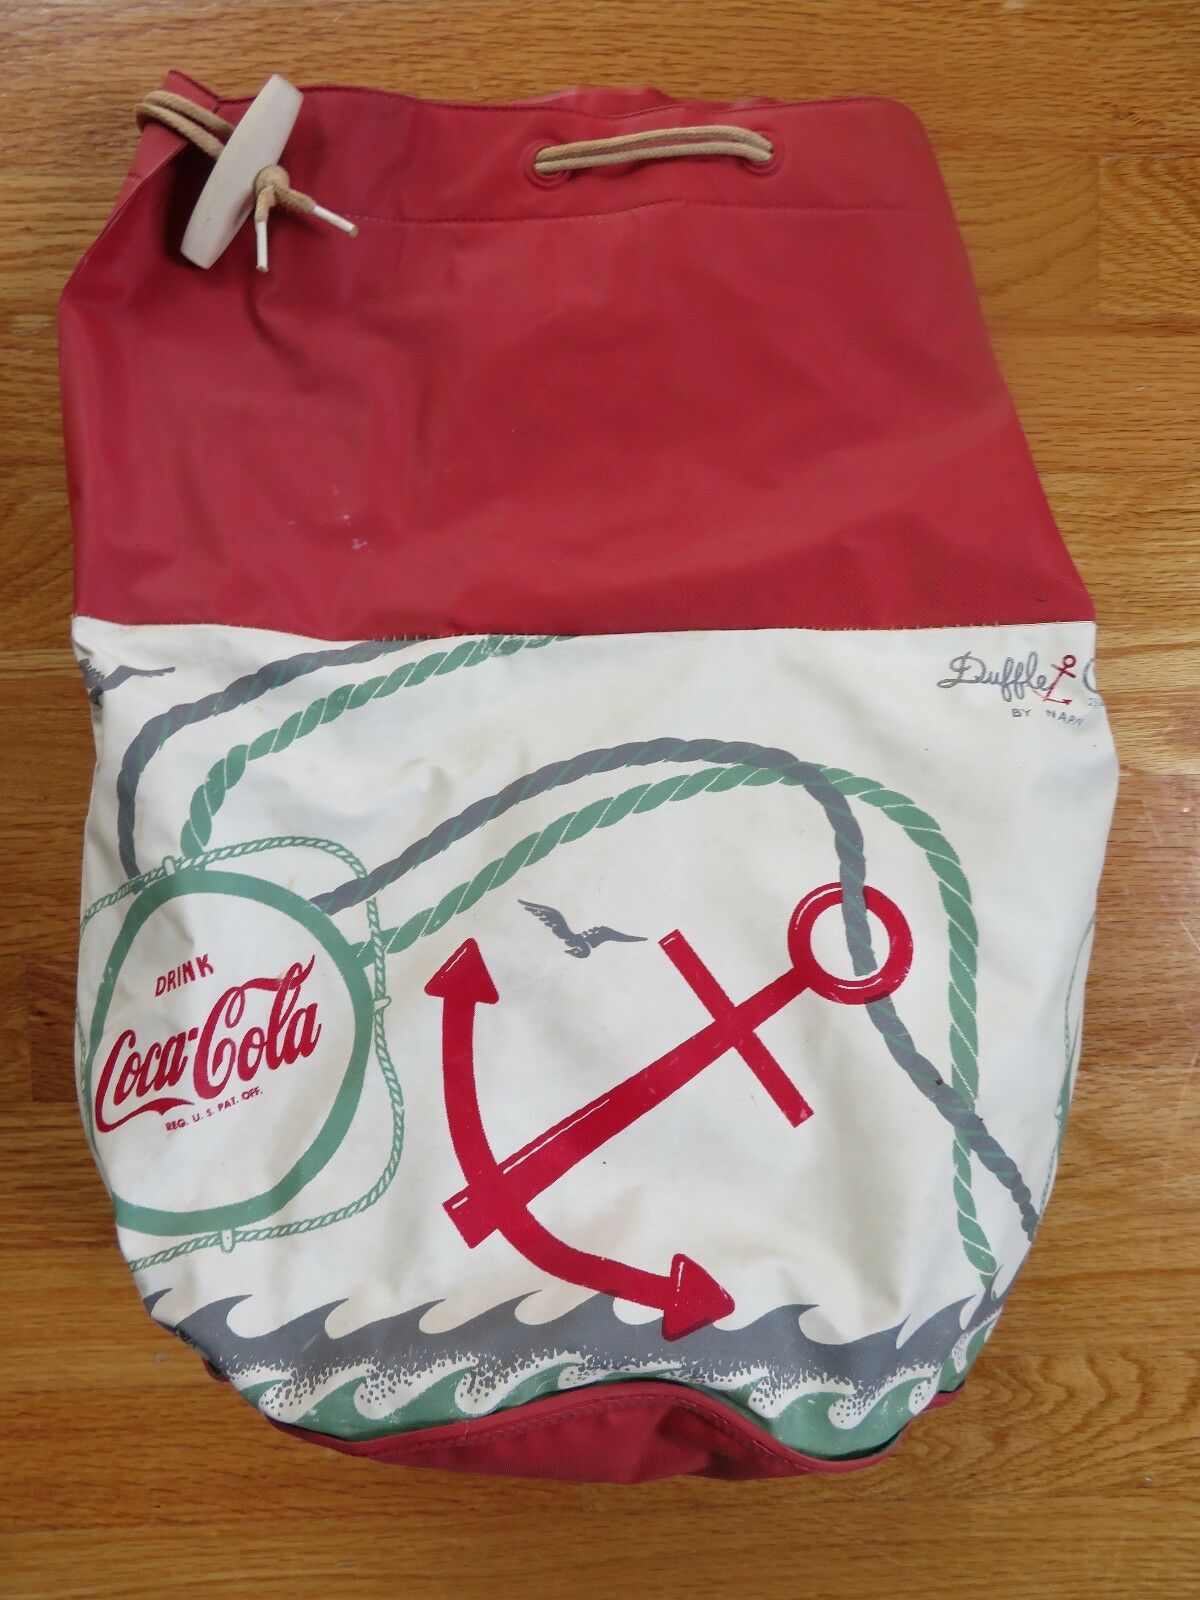 Vintage WATASEAL Drink COCA-COLA Thermo Duffle Cooler (2 1/2 Gallons) by NAPPY